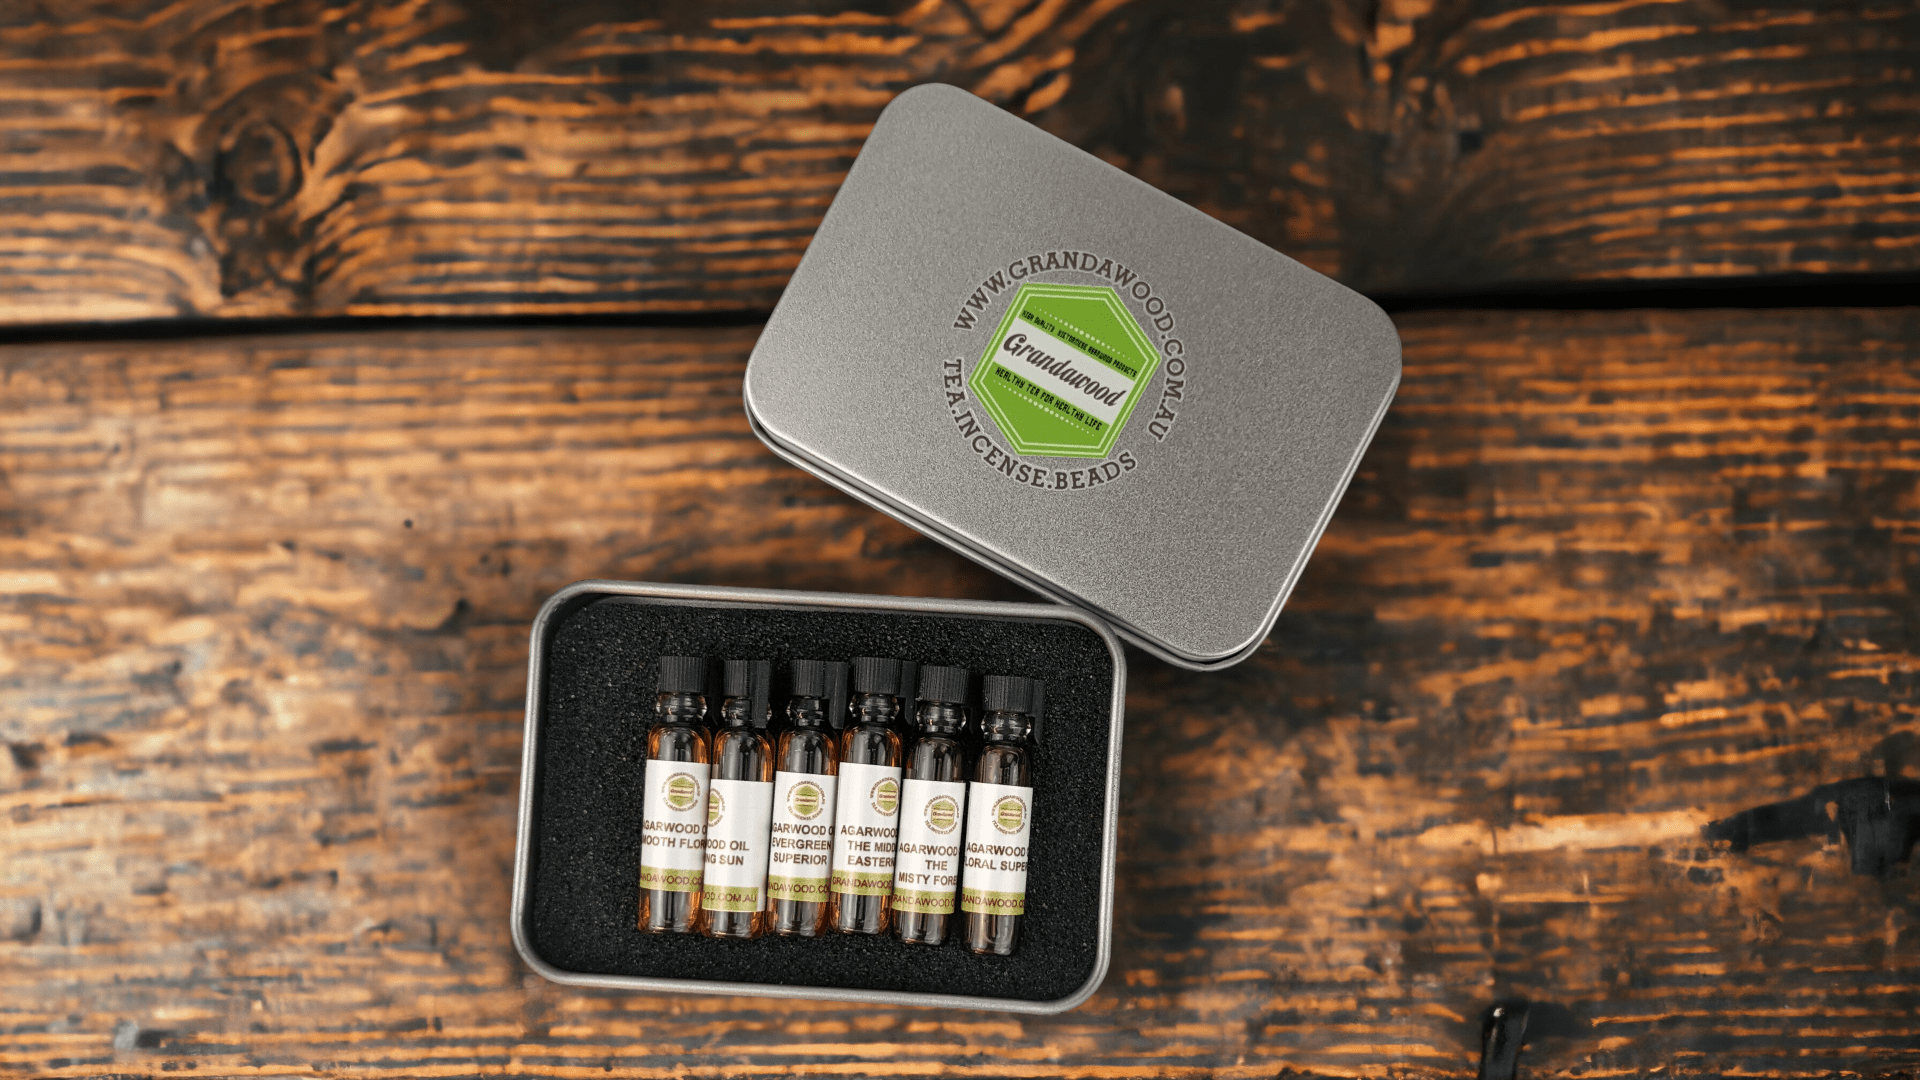 Agarwood (Oud) Essential Oil Sample Kit- To people who want to smell genuine Oud but can't get started - Wild Agarwood (Oud) Oil / 6 oils x 0.5ml each